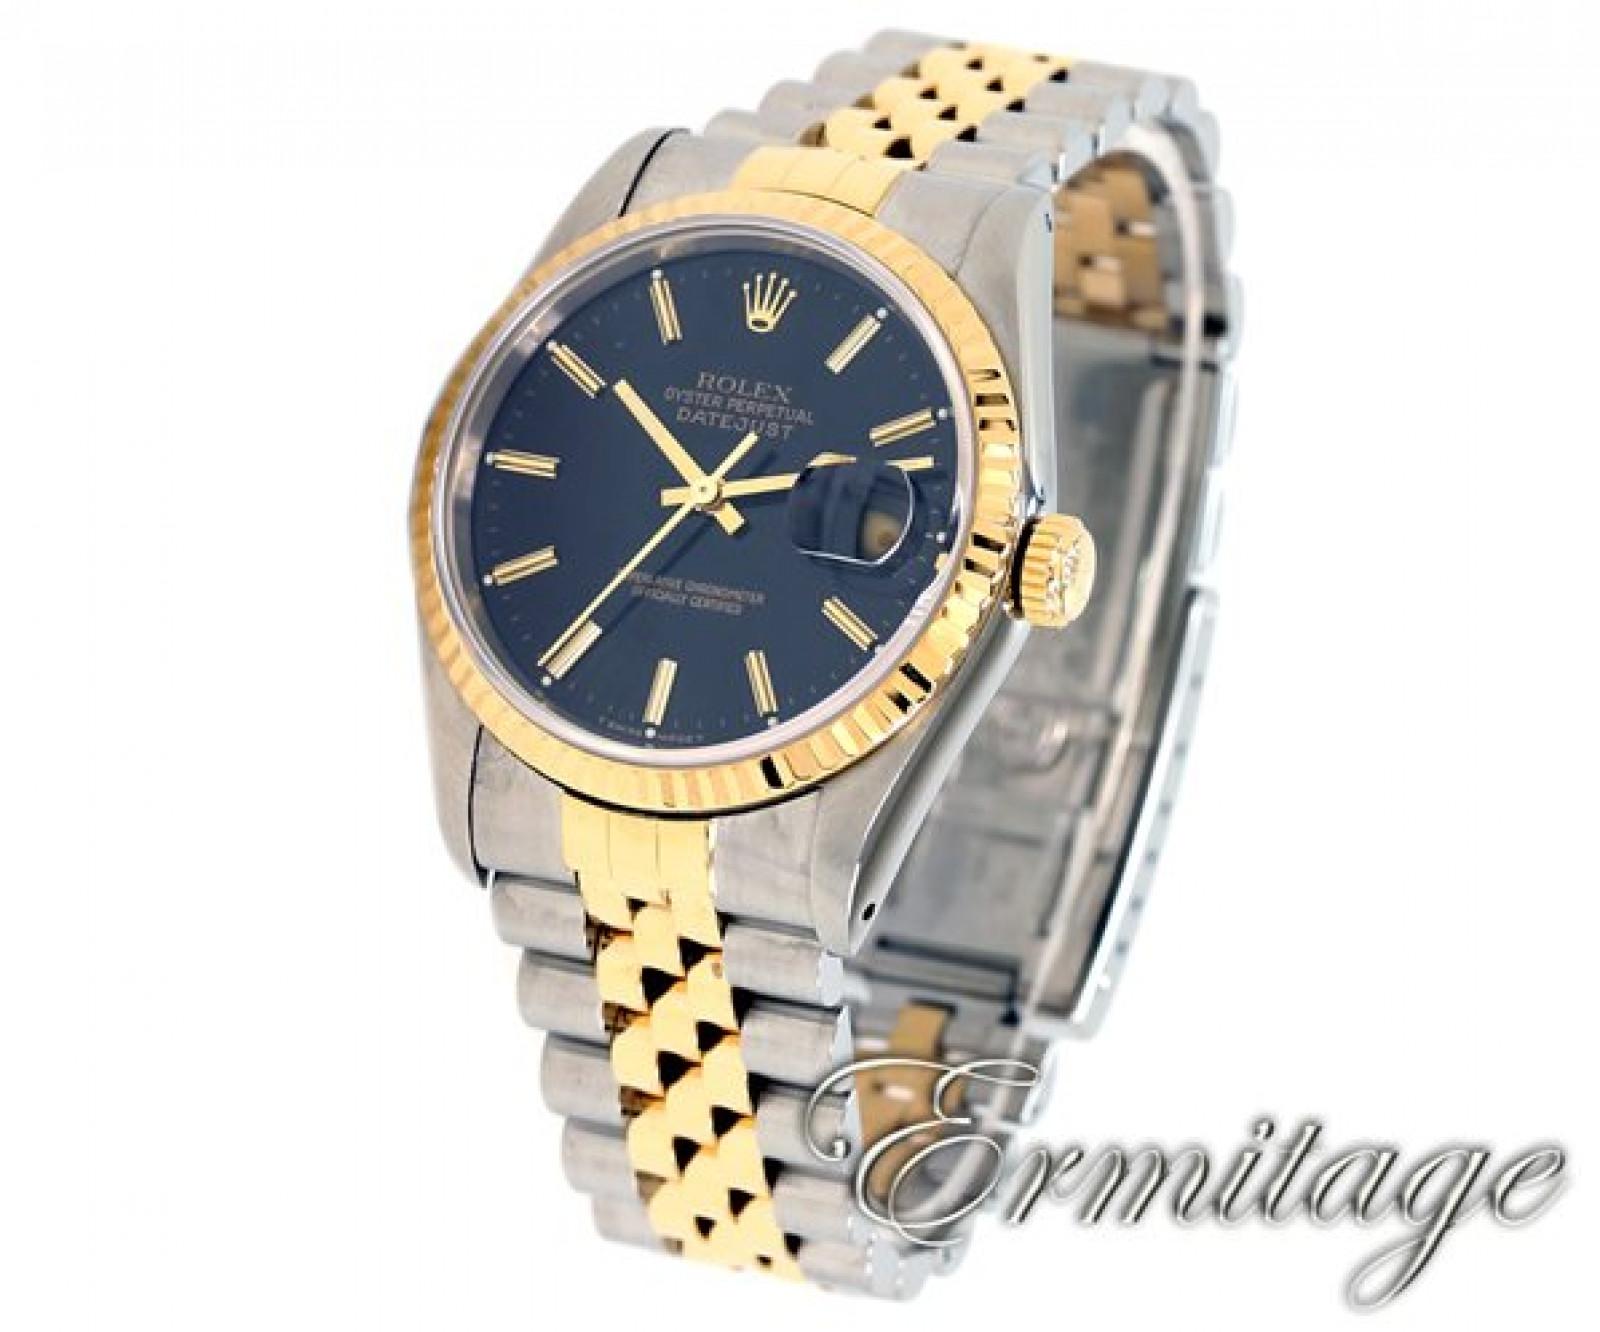 Men's Used Rolex Datejust 16233 Oyster Perpetual